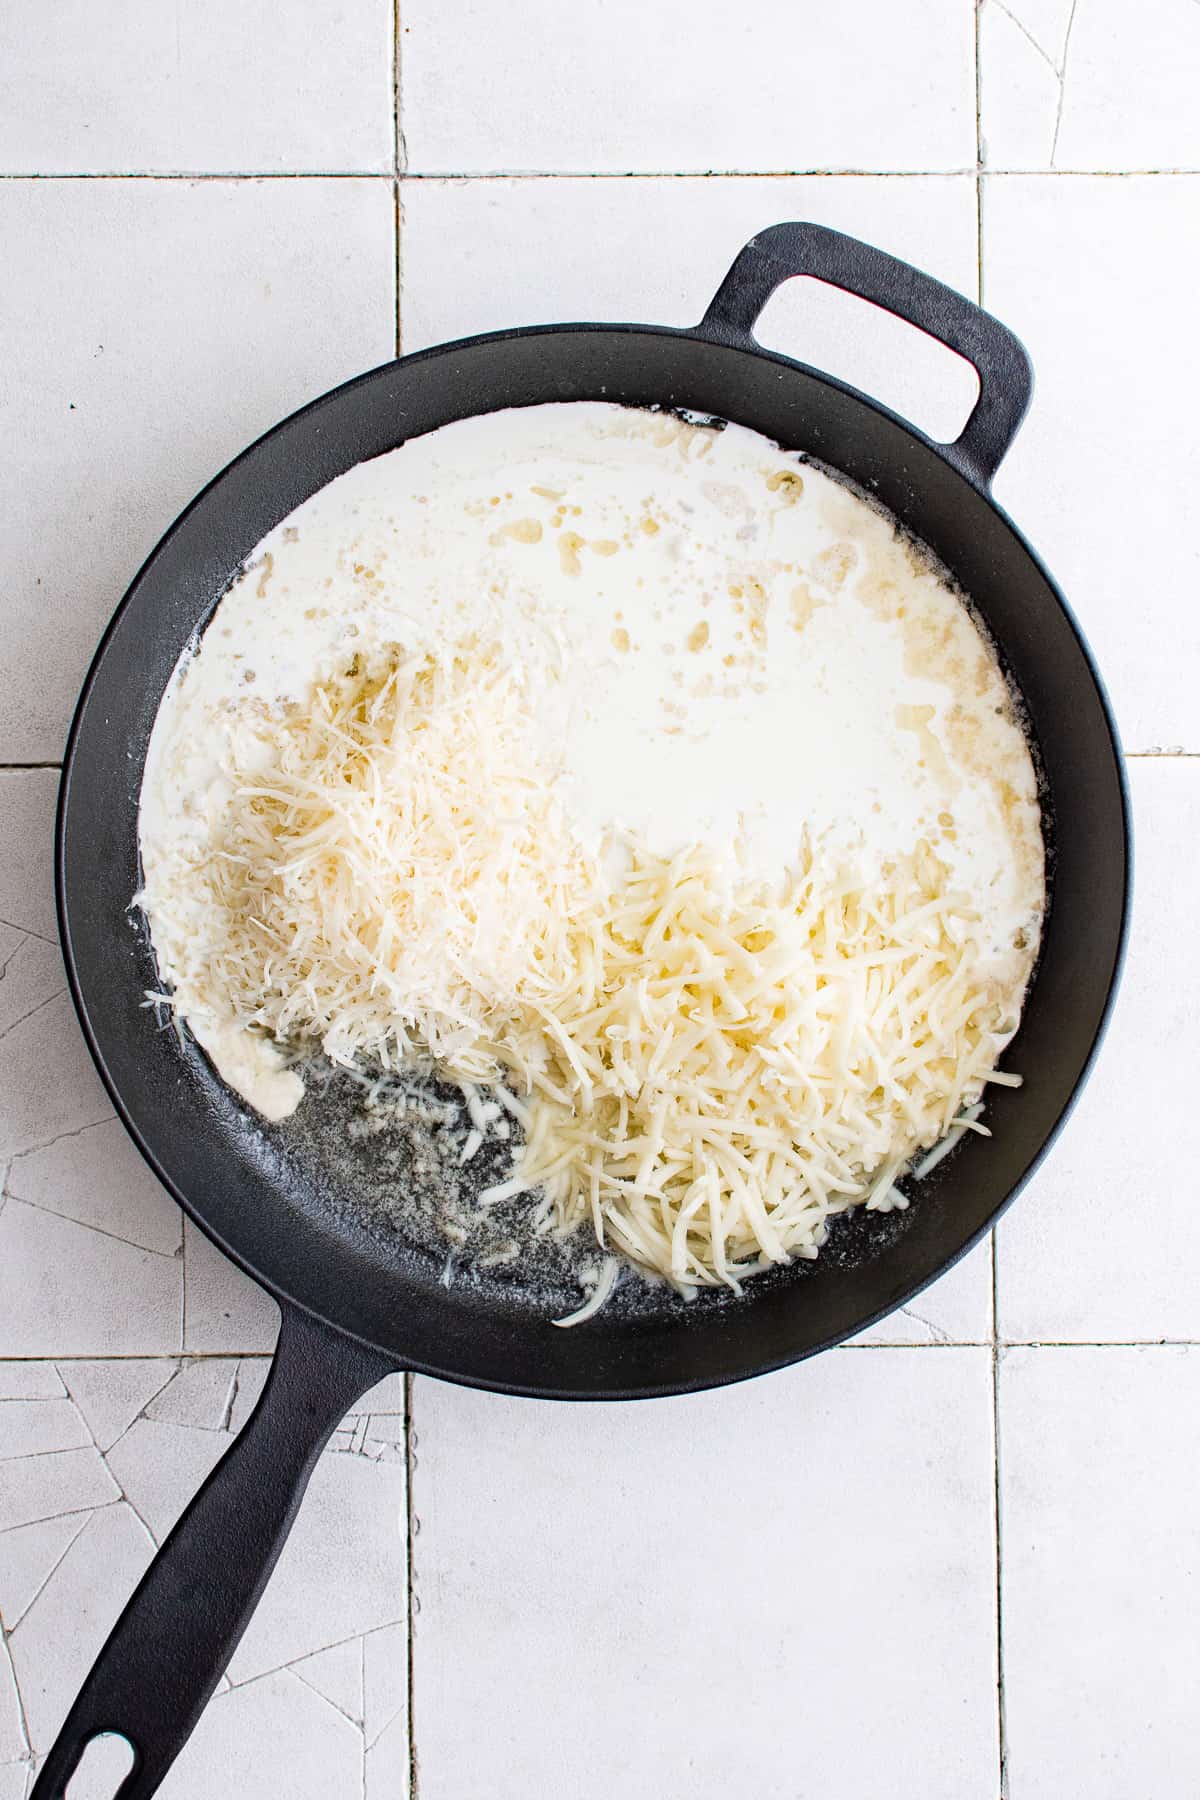 Top down view cream sauce and shredded cheese in a pan.